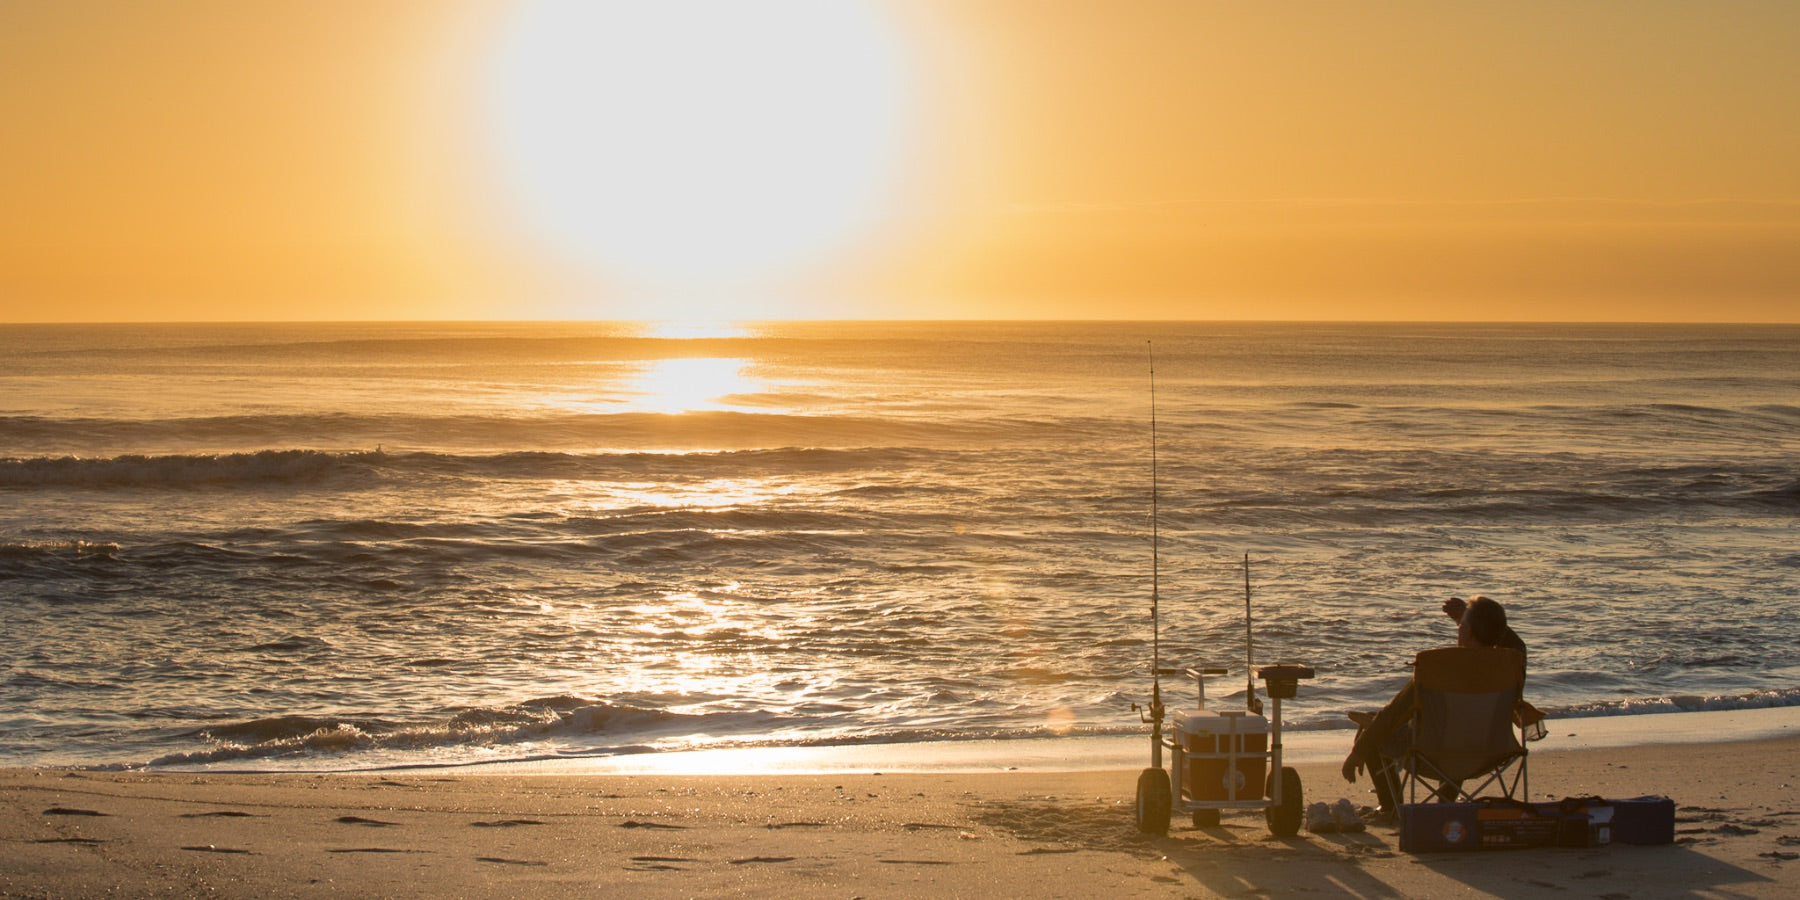 A fishermen watches the sunrise in Avon North Carolina while fishing on the beach. 